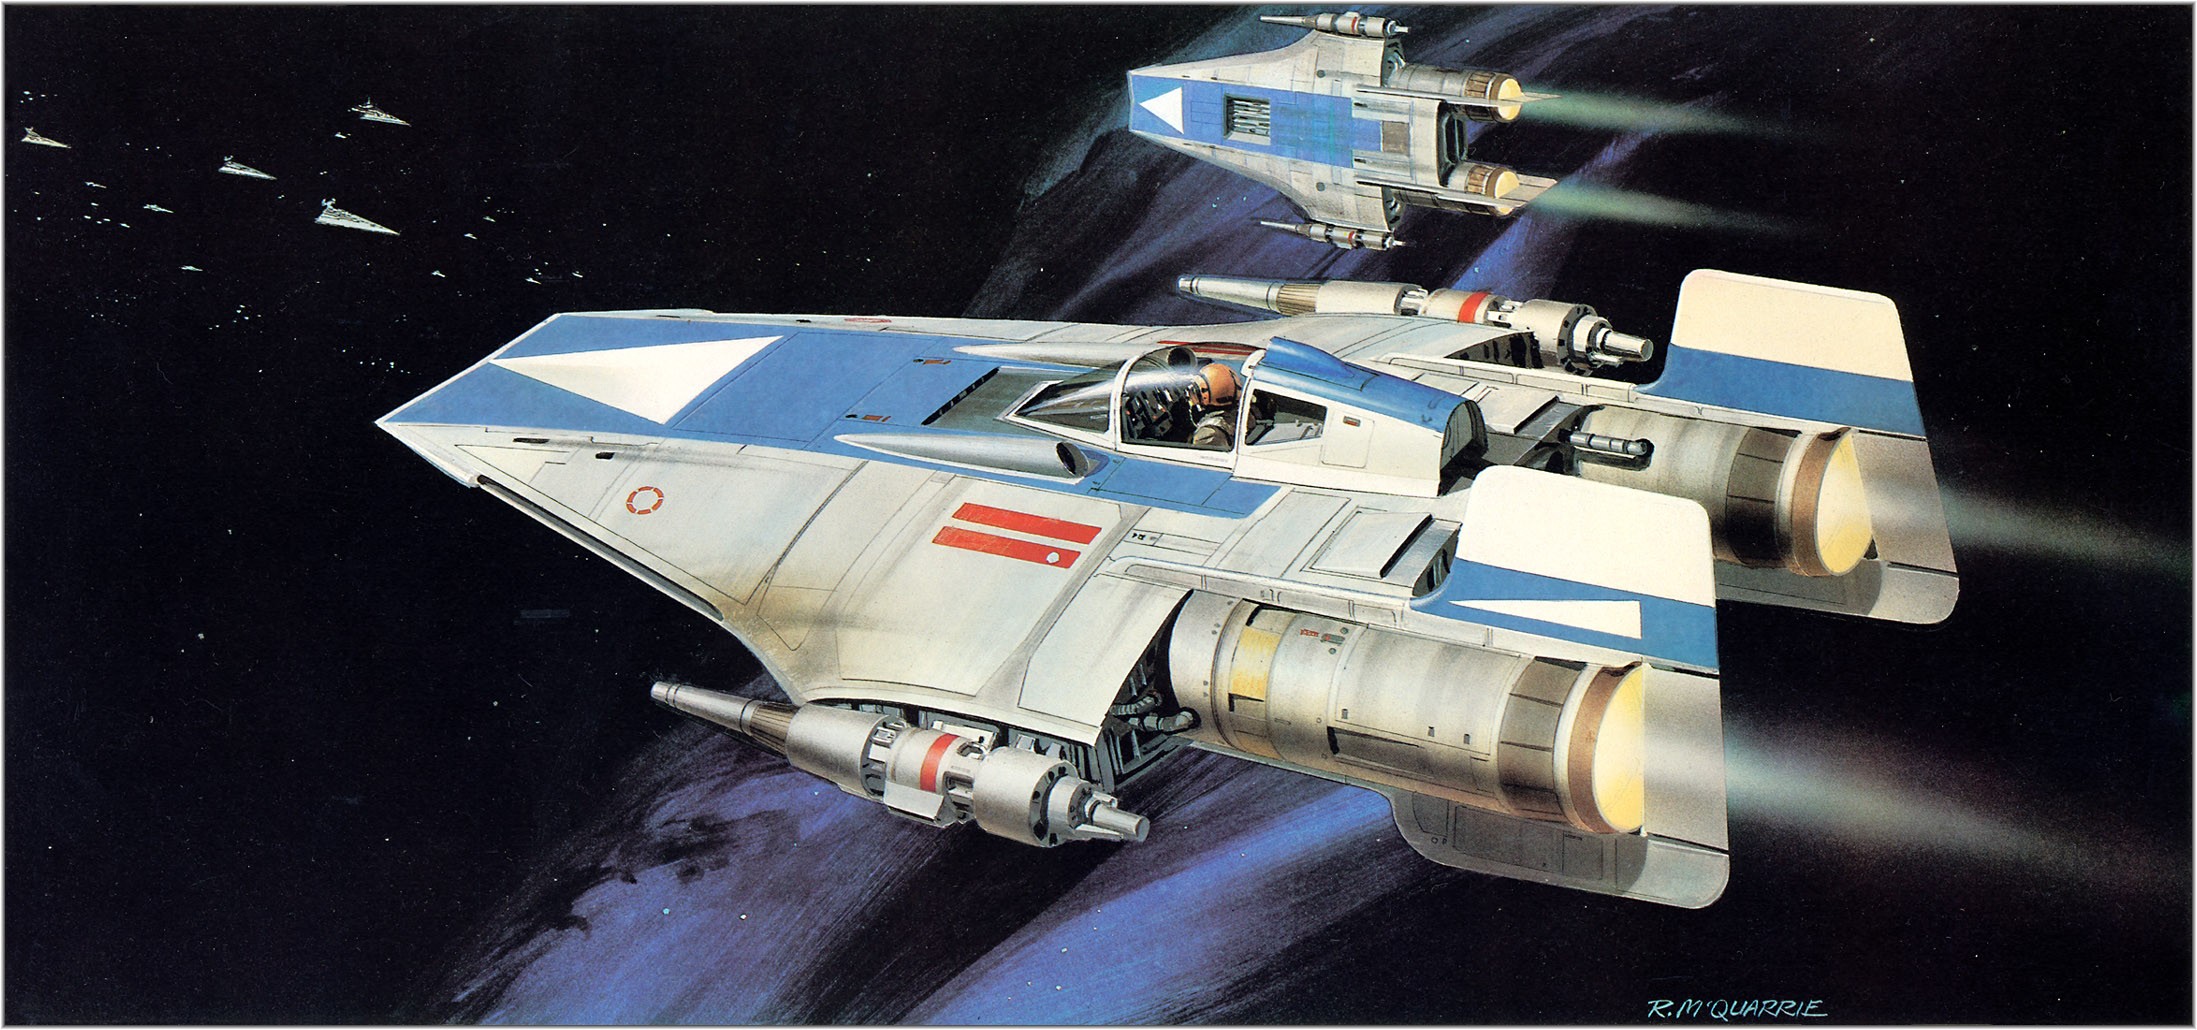 General 2197x1030 Star Wars A-Wing science fiction spaceship Star Wars Ships vehicle